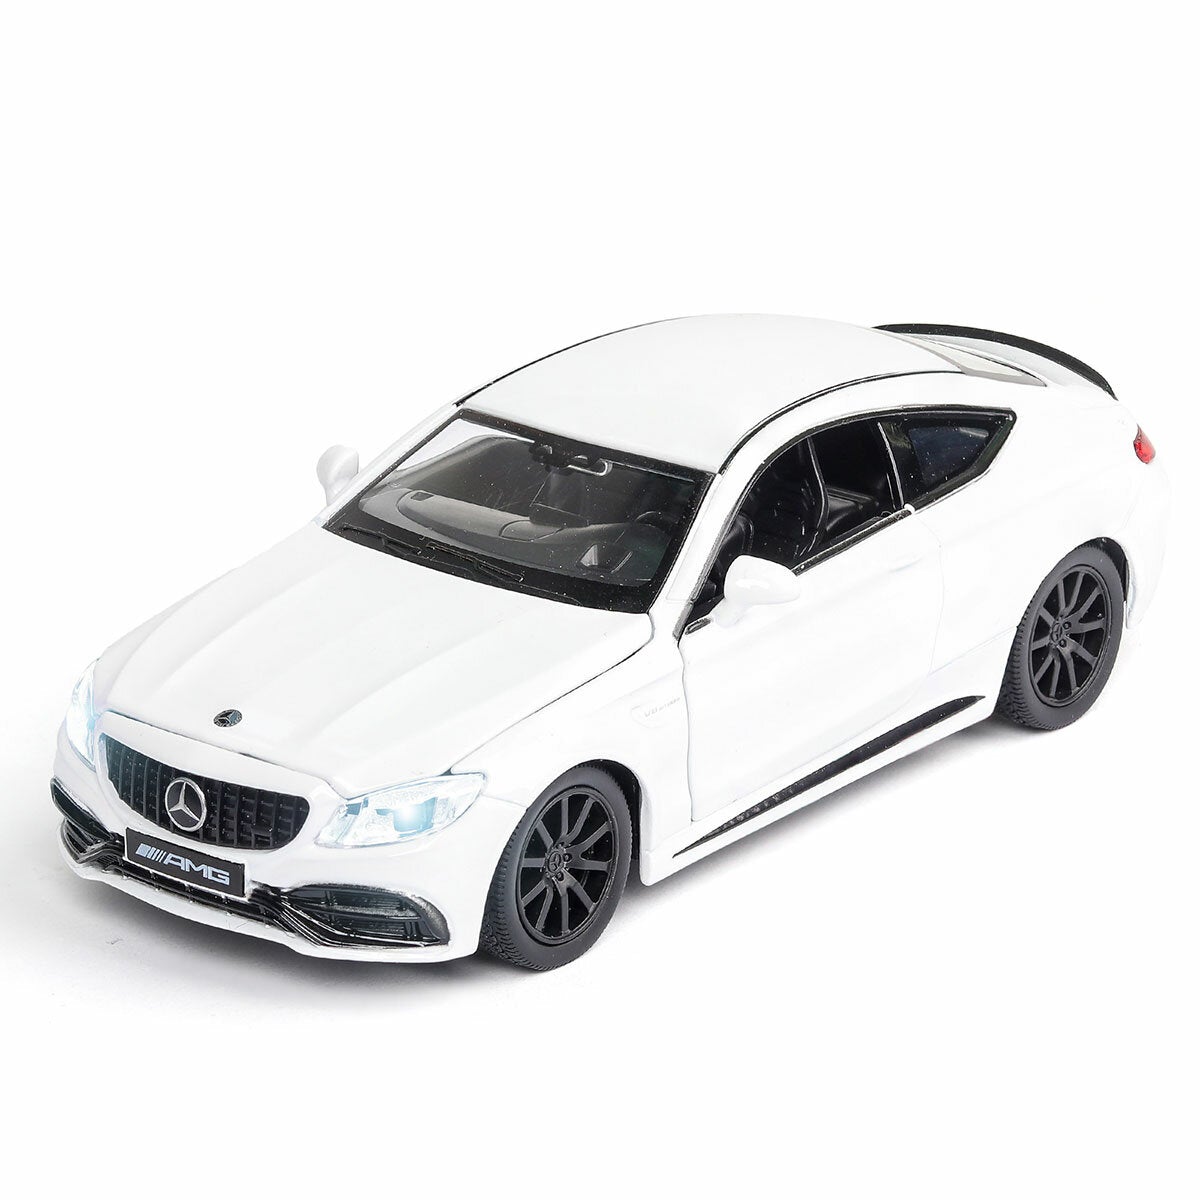 1:32 Alloy BENZS C63S AMG 4 Door Openable Pull Back Diecast Car Model Toy with Sound Light for Collection Gift